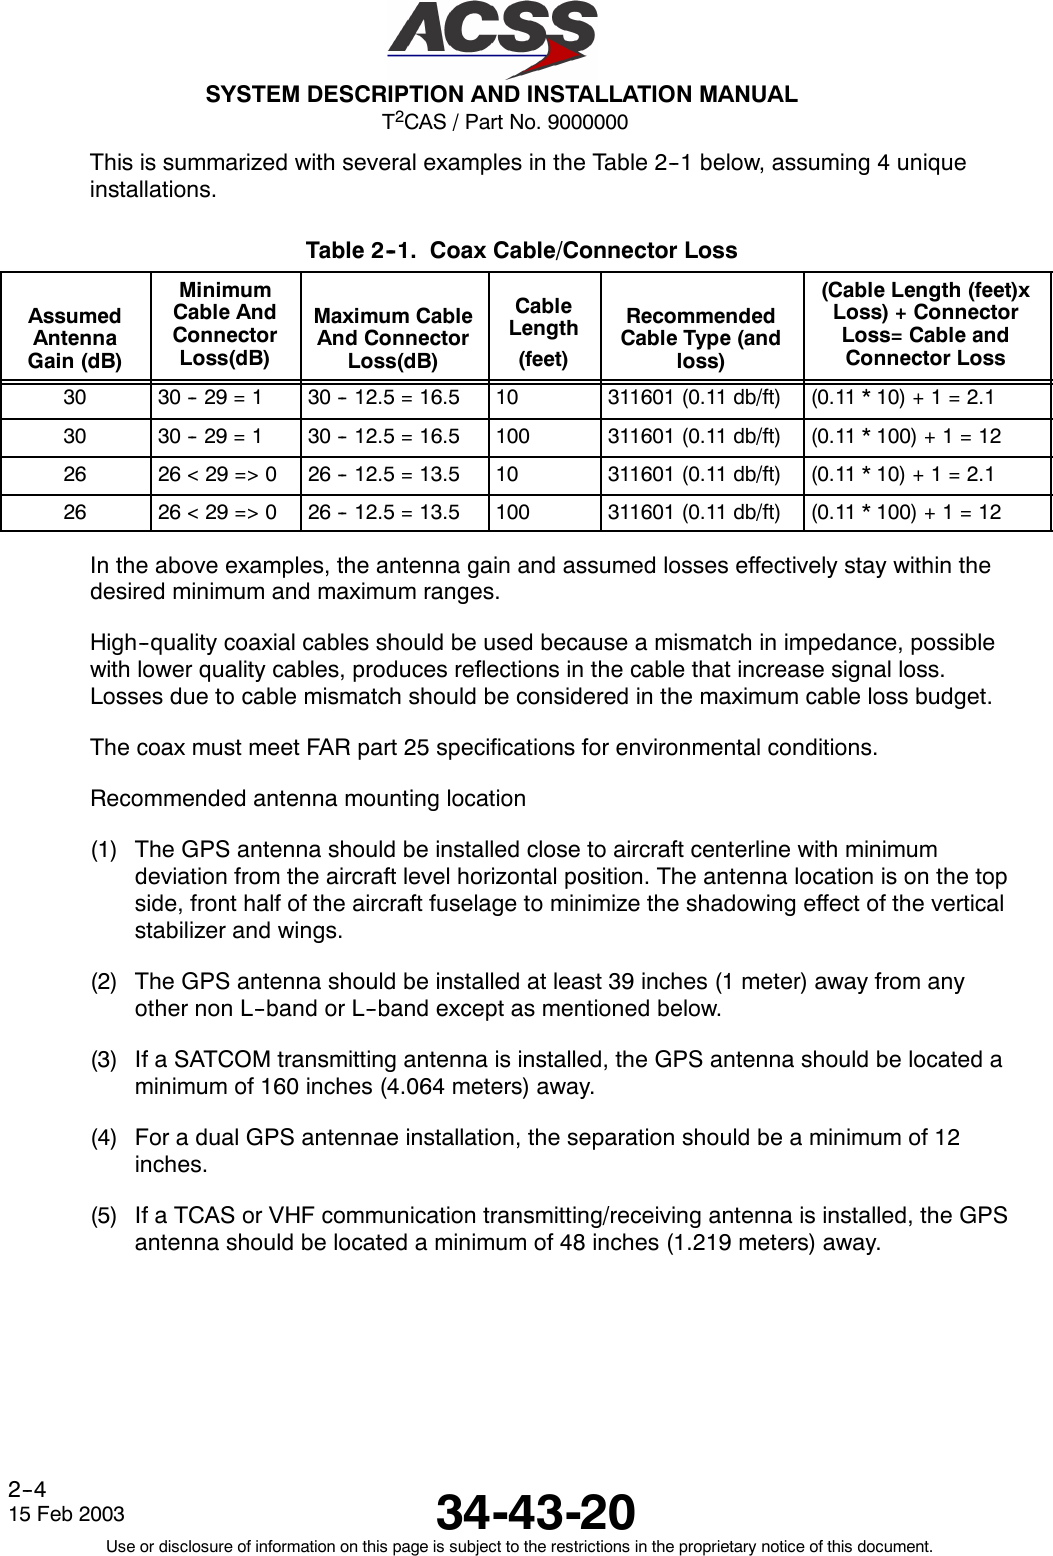 T2CAS / Part No. 9000000SYSTEM DESCRIPTION AND INSTALLATION MANUAL34-43-2015 Feb 2003Use or disclosure of information on this page is subject to the restrictions in the proprietary notice of this document.2--4This is summarized with several examples in the Table 2--1 below, assuming 4 uniqueinstallations.Table 2--1. Coax Cable/Connector LossAssumedAntennaGain (dB)MinimumCable AndConnectorLoss(dB)Maximum CableAnd ConnectorLoss(dB)CableLength(feet)RecommendedCableType(andloss)(Cable Length (feet)xLoss) + ConnectorLoss= Cable andConnector Loss30 30 -- 29 = 1 30 -- 12.5 = 16.5 10 311601 (0.11 db/ft) (0.11*10)+1=2.130 30 -- 29 = 1 30 -- 12.5 = 16.5 100 311601 (0.11 db/ft) (0.11 * 100) + 1 = 1226 26&lt;29=&gt;0 26 -- 12.5 = 13.5 10 311601 (0.11 db/ft) (0.11*10)+1=2.126 26&lt;29=&gt;0 26 -- 12.5 = 13.5 100 311601 (0.11 db/ft) (0.11 * 100) + 1 = 12In the above examples, the antenna gain and assumed losses effectively stay within thedesired minimum and maximum ranges.High--quality coaxial cables should be used because a mismatch in impedance, possiblewith lower quality cables, produces reflections in the cable that increase signal loss.Losses due to cable mismatch should be considered in the maximum cable loss budget.The coax must meet FAR part 25 specifications for environmental conditions.Recommended antenna mounting location(1) The GPS antenna should be installed close to aircraft centerline with minimumdeviation from the aircraft level horizontal position. The antenna location is on the topside, front half of the aircraft fuselage to minimize the shadowing effect of the verticalstabilizer and wings.(2) The GPS antenna should be installed at least 39 inches (1 meter) away from anyother non L--band or L--band except as mentioned below.(3) If a SATCOM transmitting antenna is installed, the GPS antenna should be located aminimum of 160 inches (4.064 meters) away.(4) For a dual GPS antennae installation, the separation should be a minimum of 12inches.(5) If a TCAS or VHF communication transmitting/receiving antenna is installed, the GPSantenna should be located a minimum of 48 inches (1.219 meters) away.